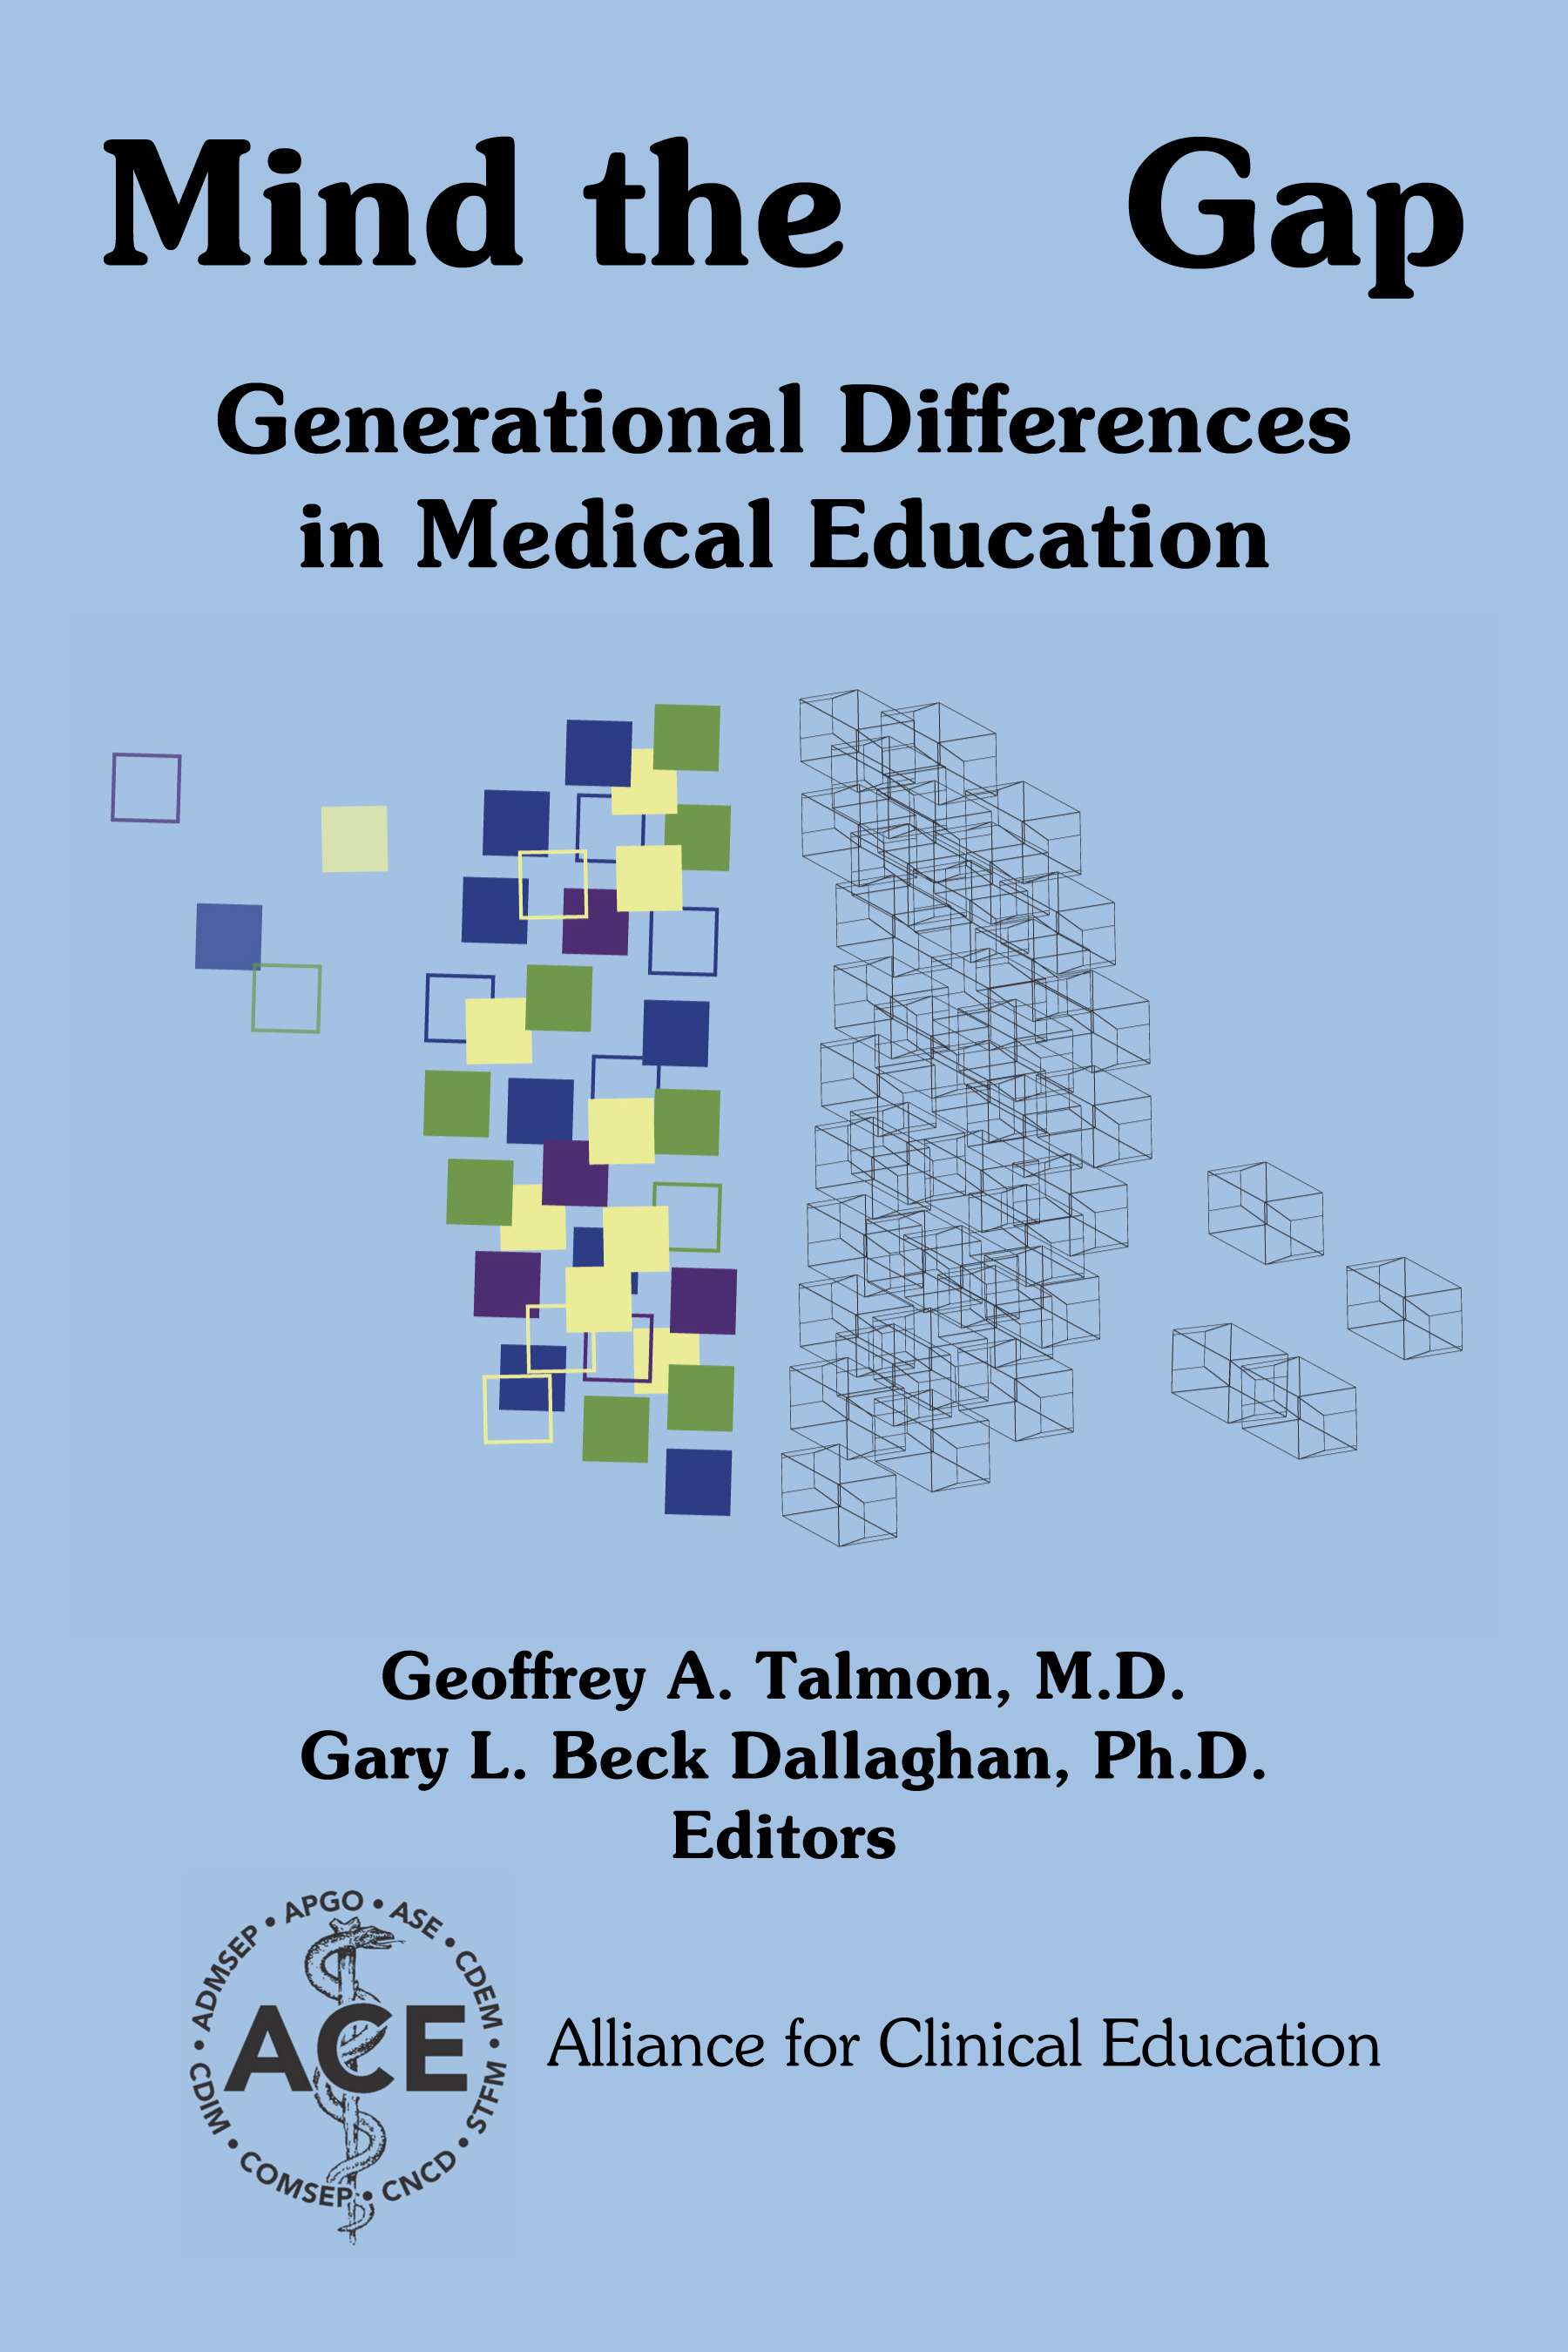 Mind the Gap: Generational Differences in Medical Education by the Alliance for Clinical Education